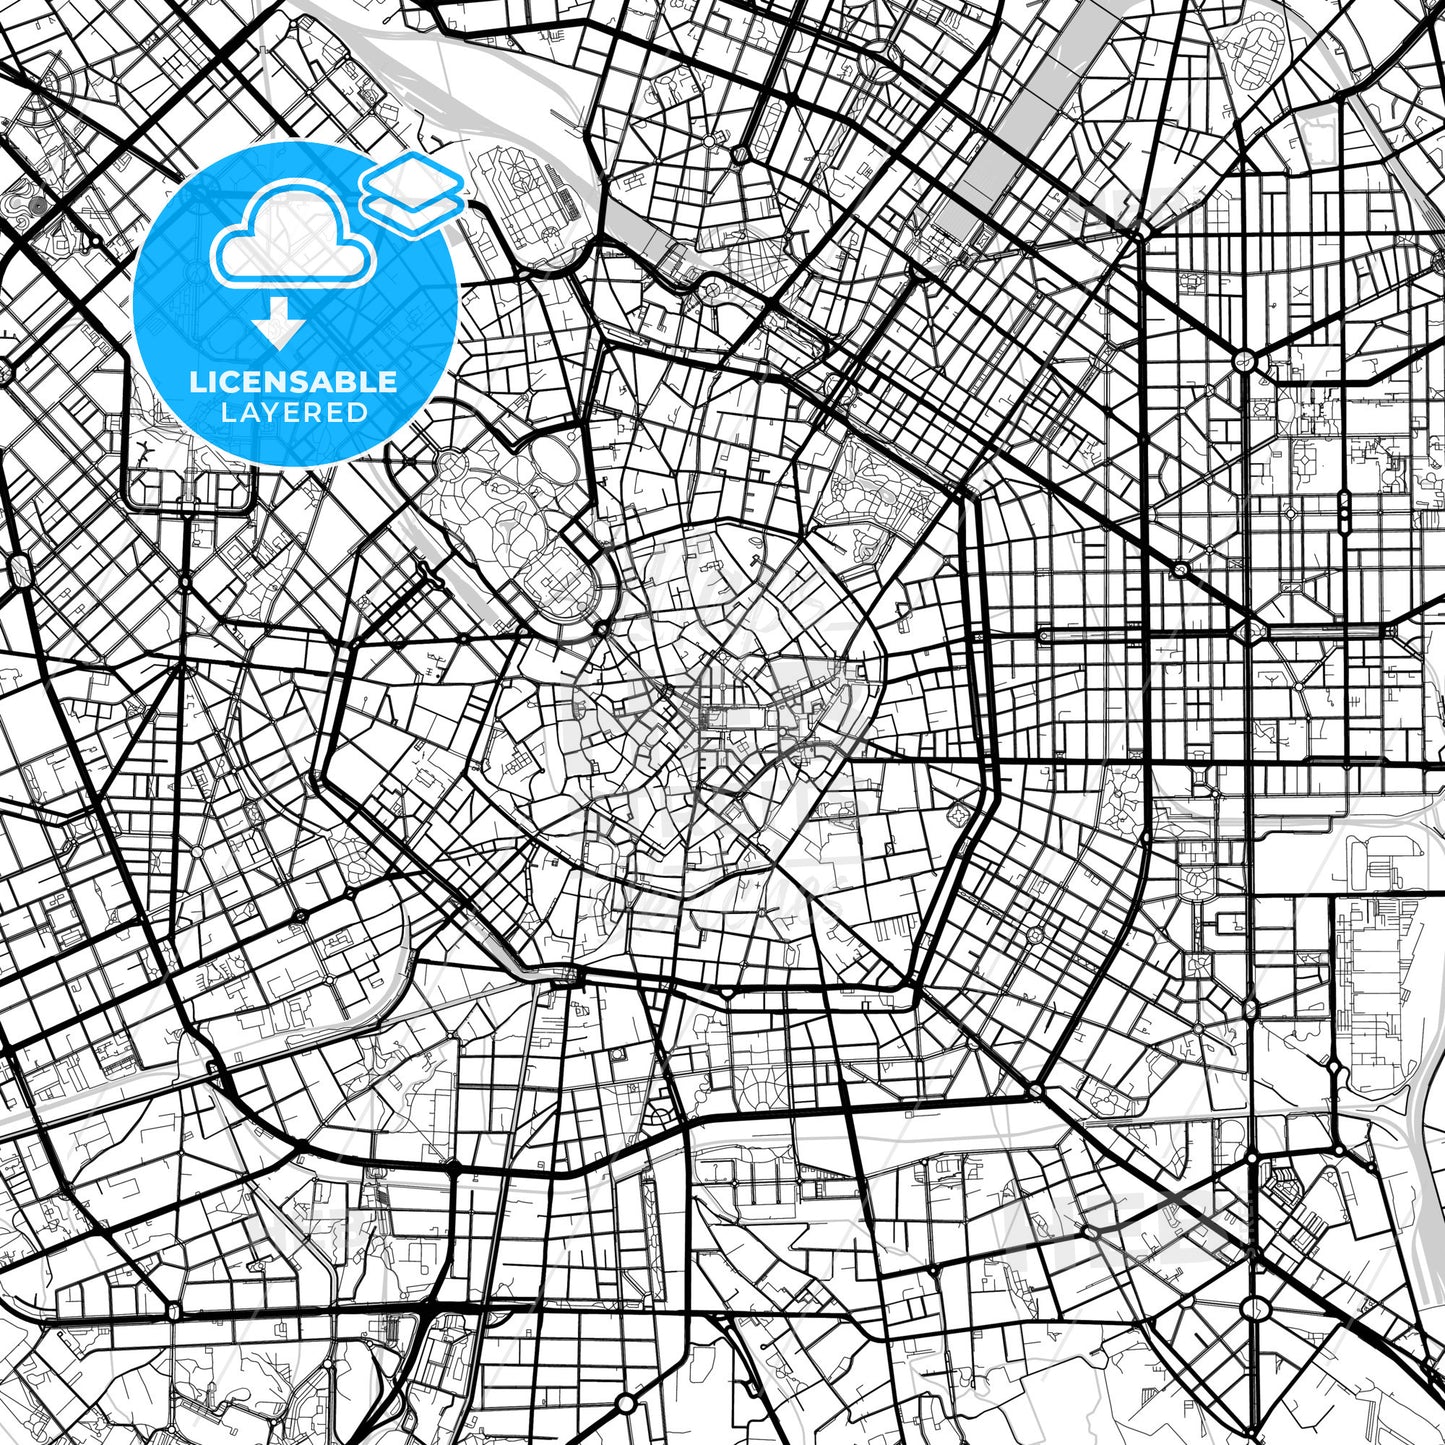 Layered PDF map of Milan, Lombardy, Italy